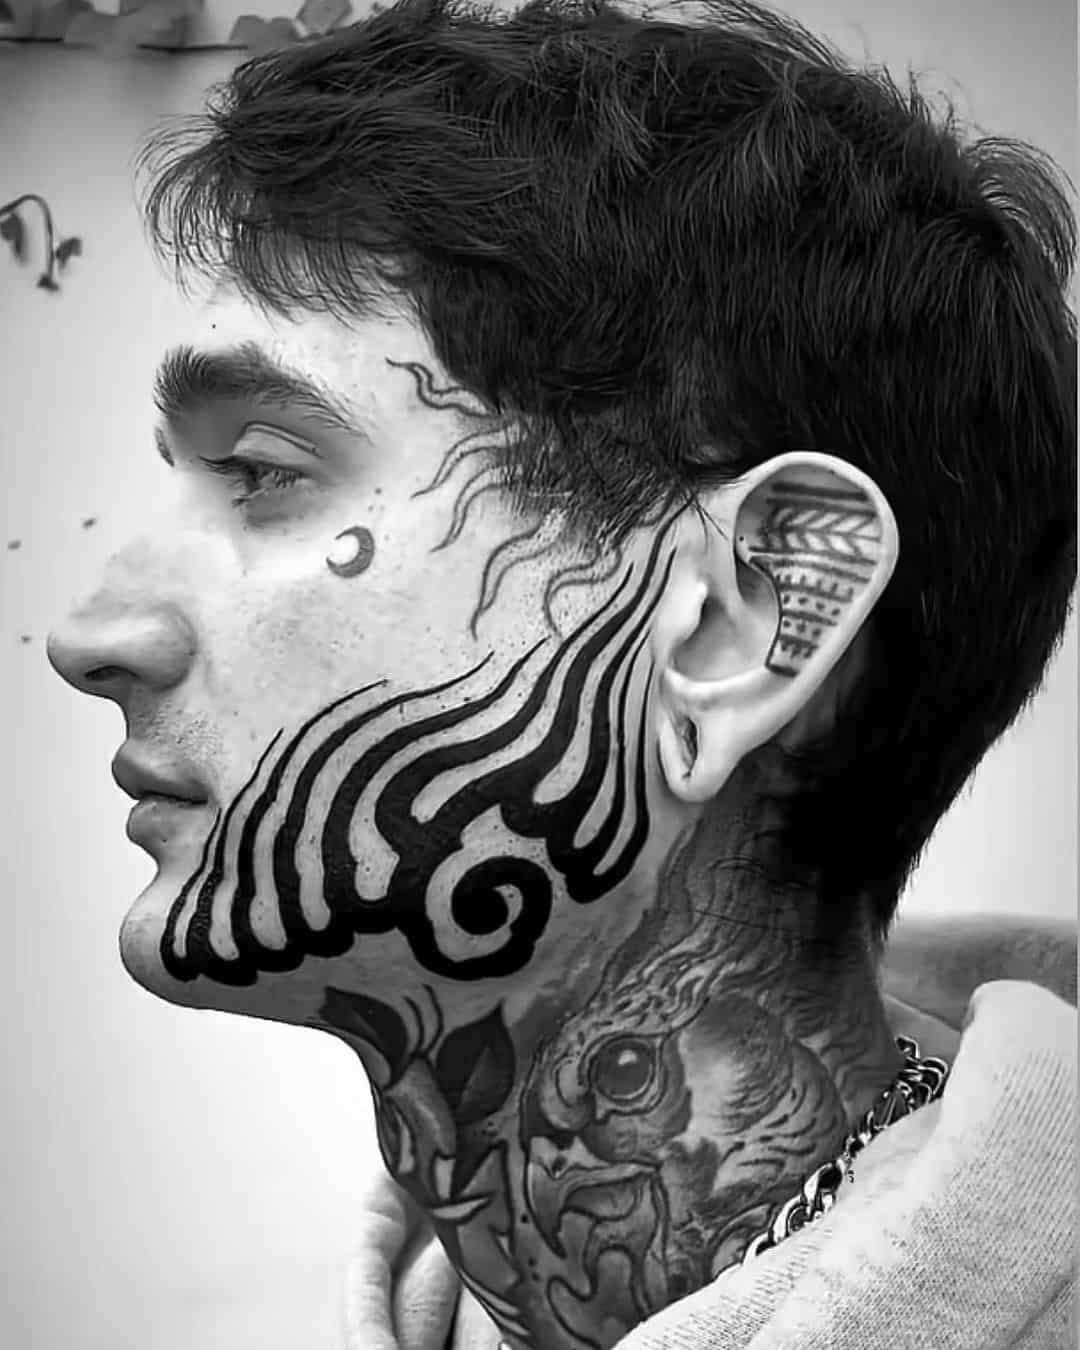 20 of the most eye-catching face tattoos!